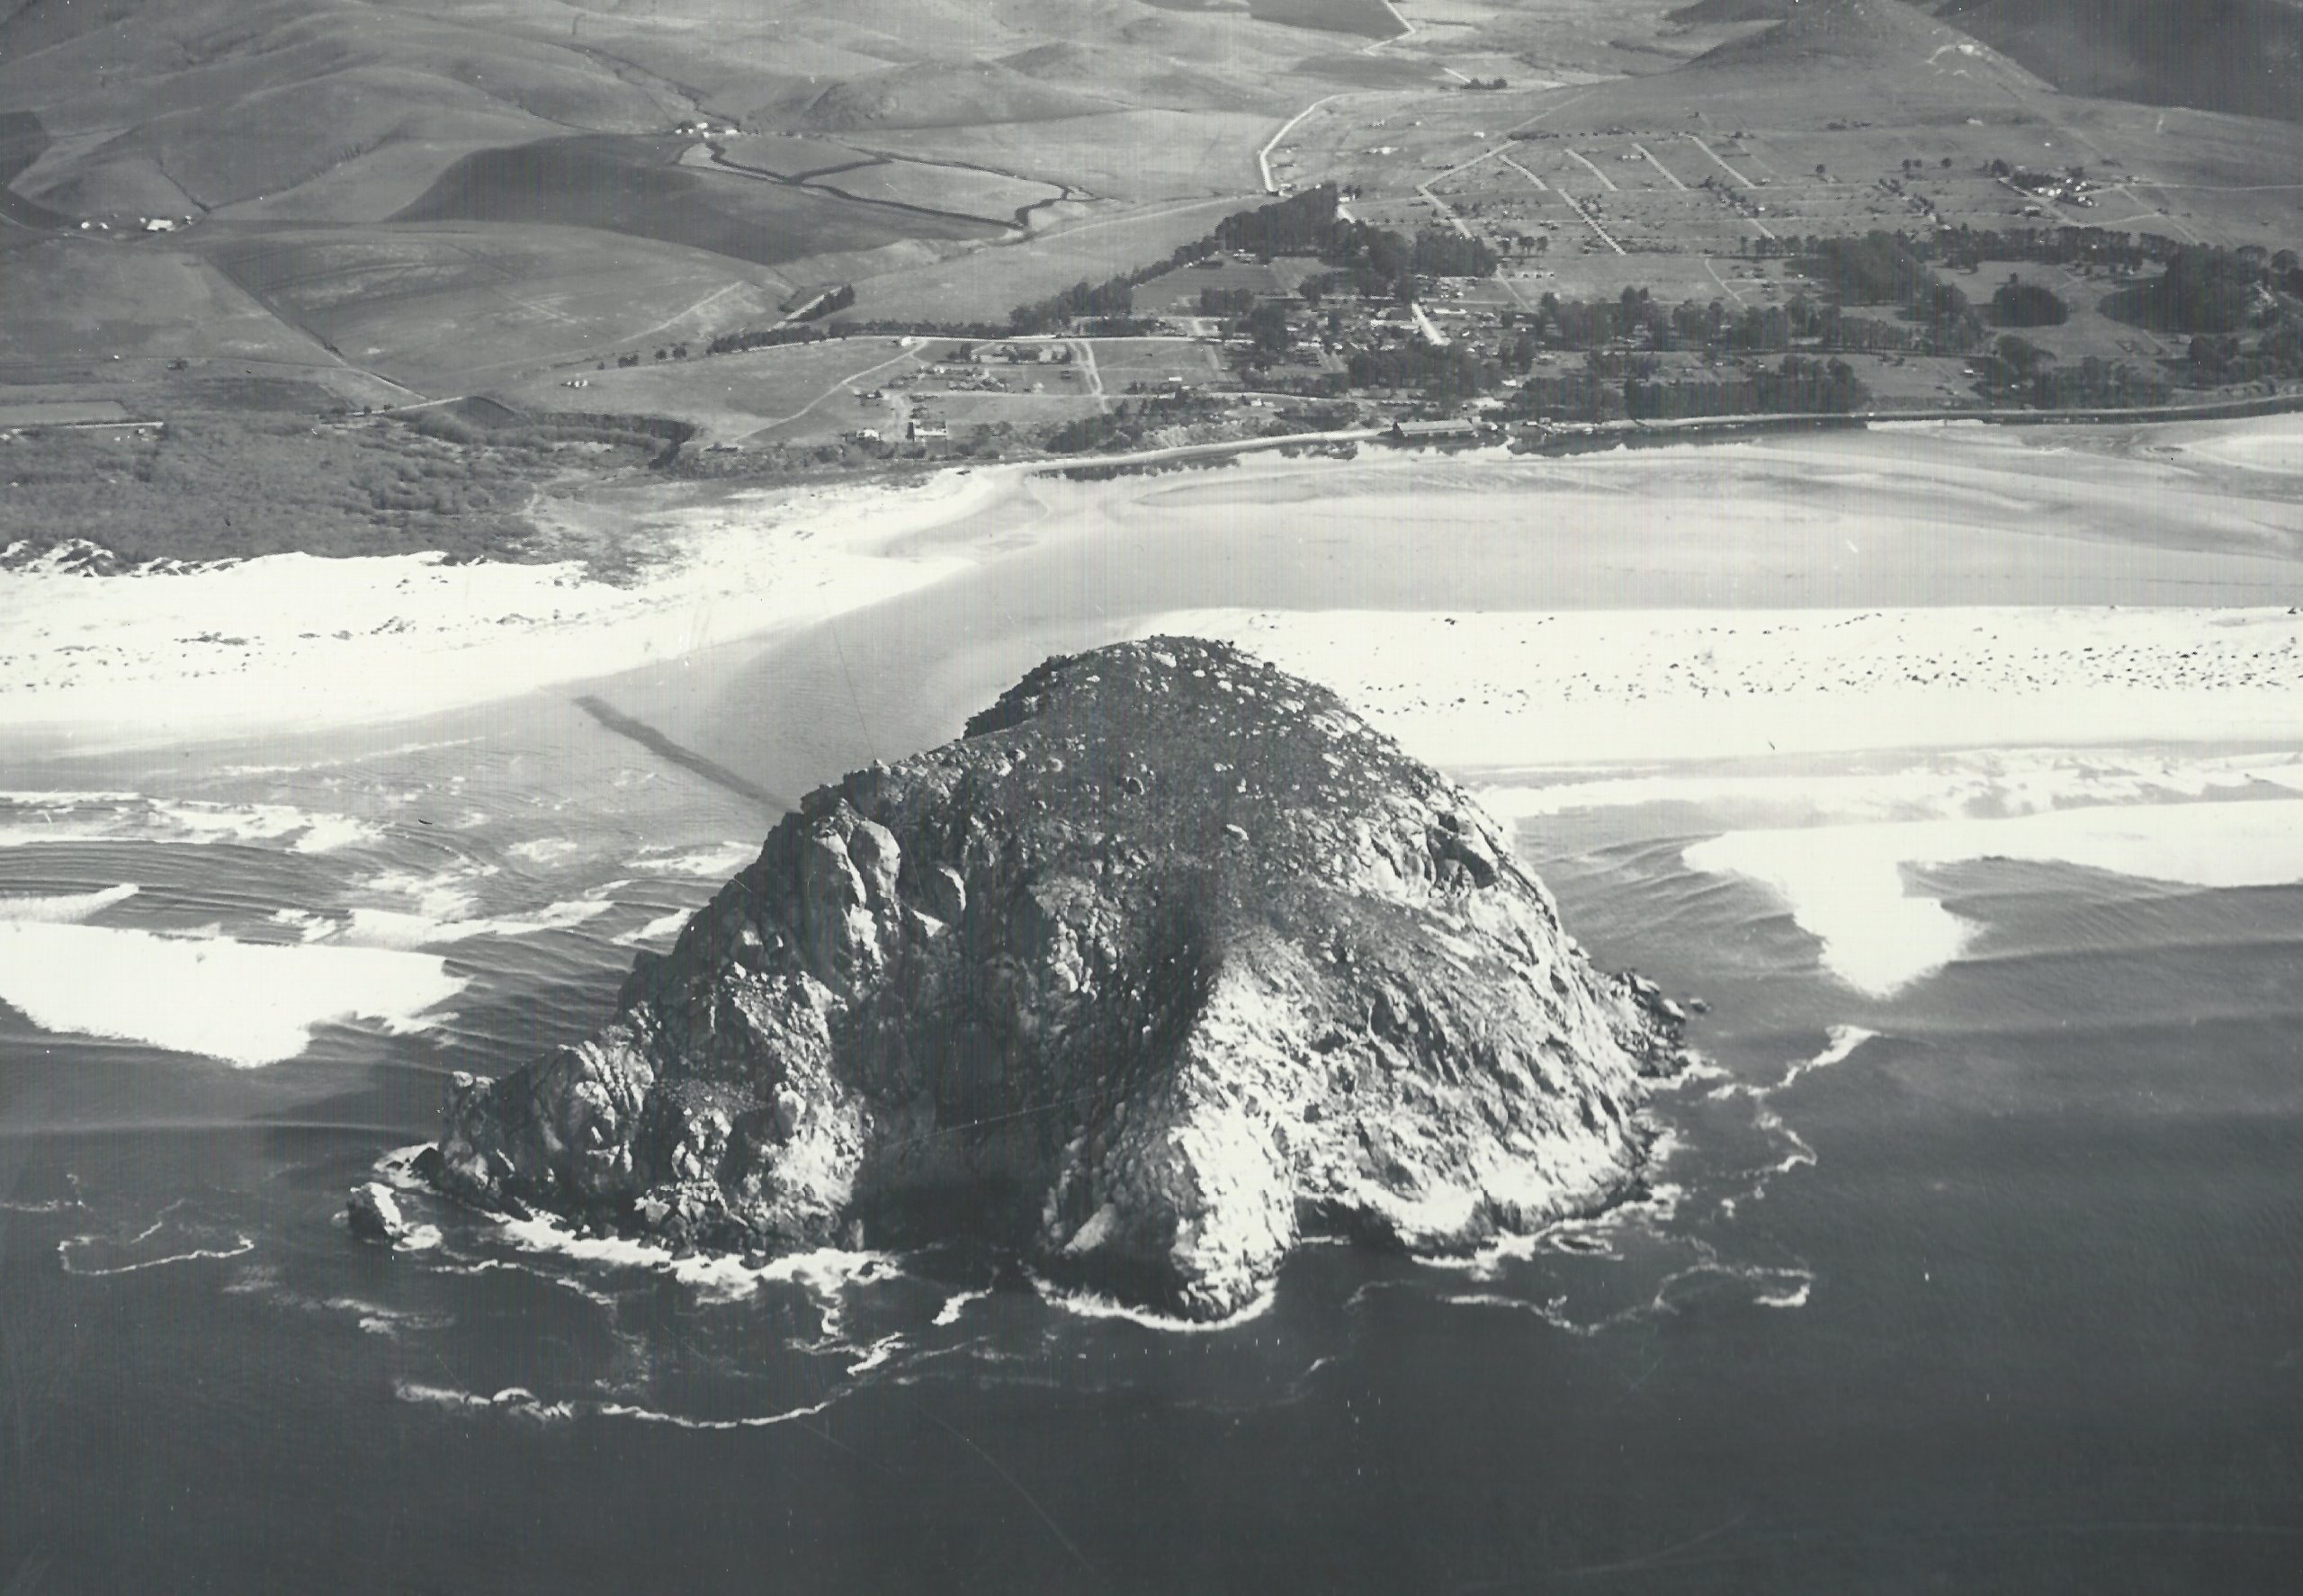 http://historicalmorrobay.org/wp-content/uploads/2022/08/Copy-of-1912-era-aerial-of-harbor-scaled.jpg